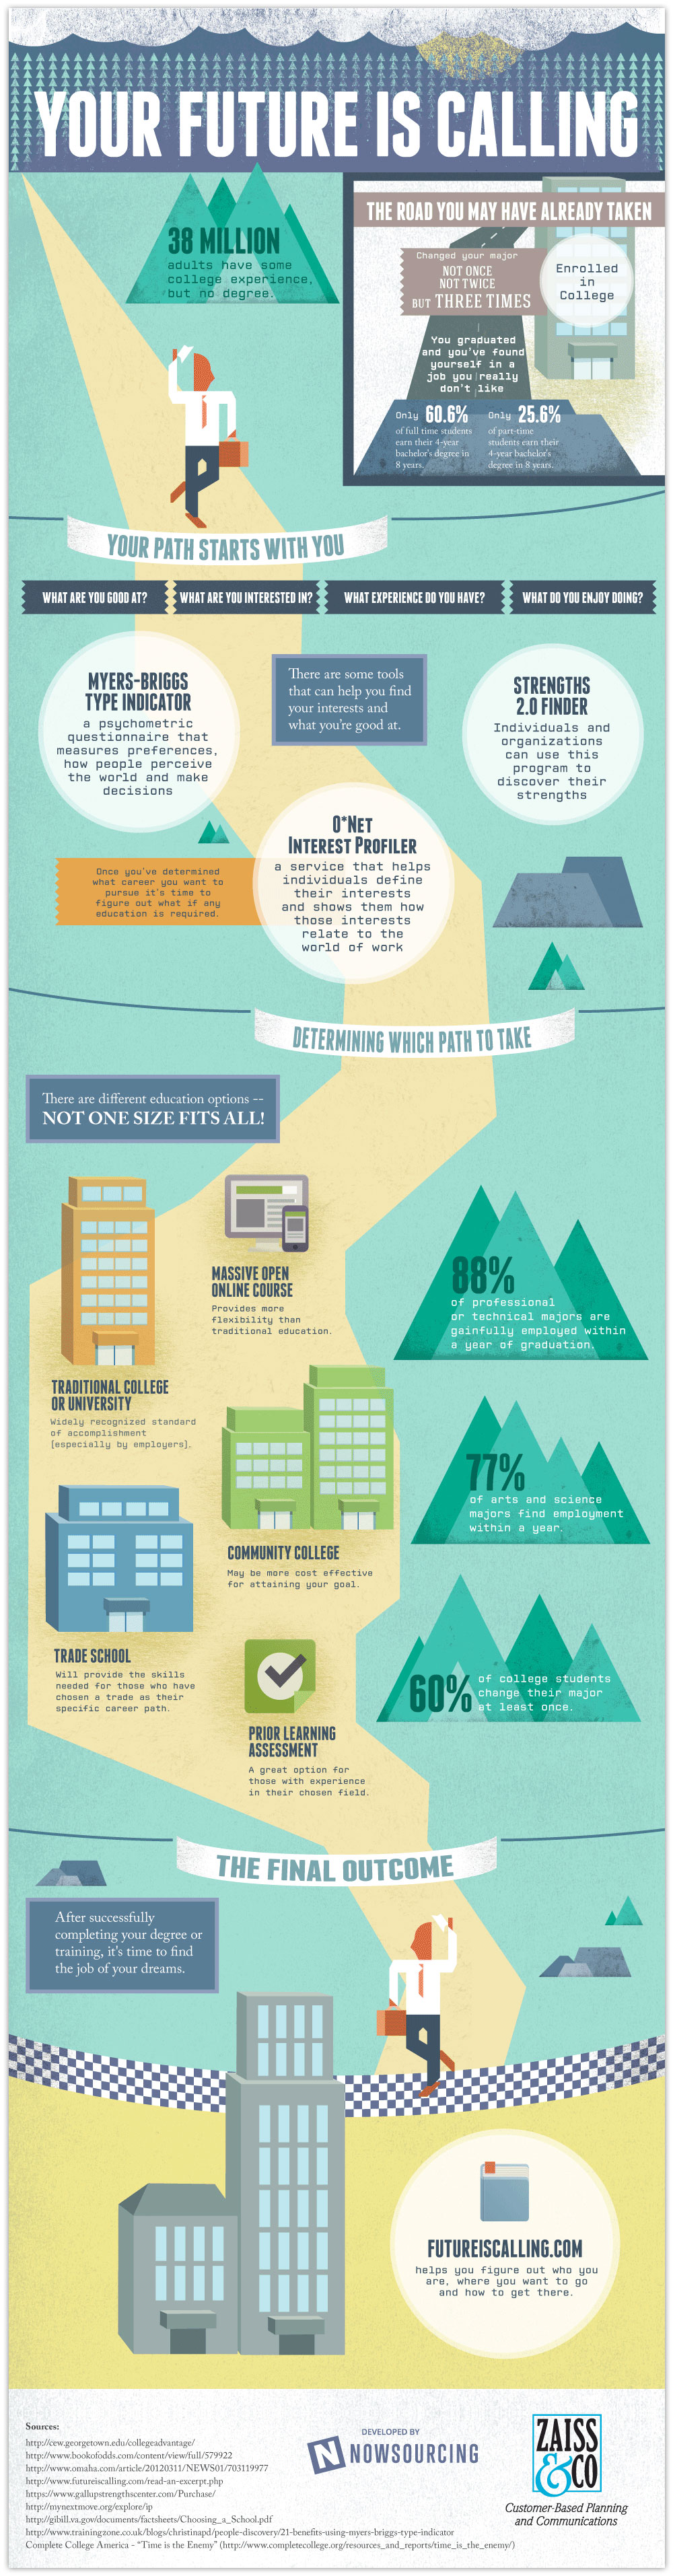 New College Perspective That Makes It Worth The Cost [Infographic]